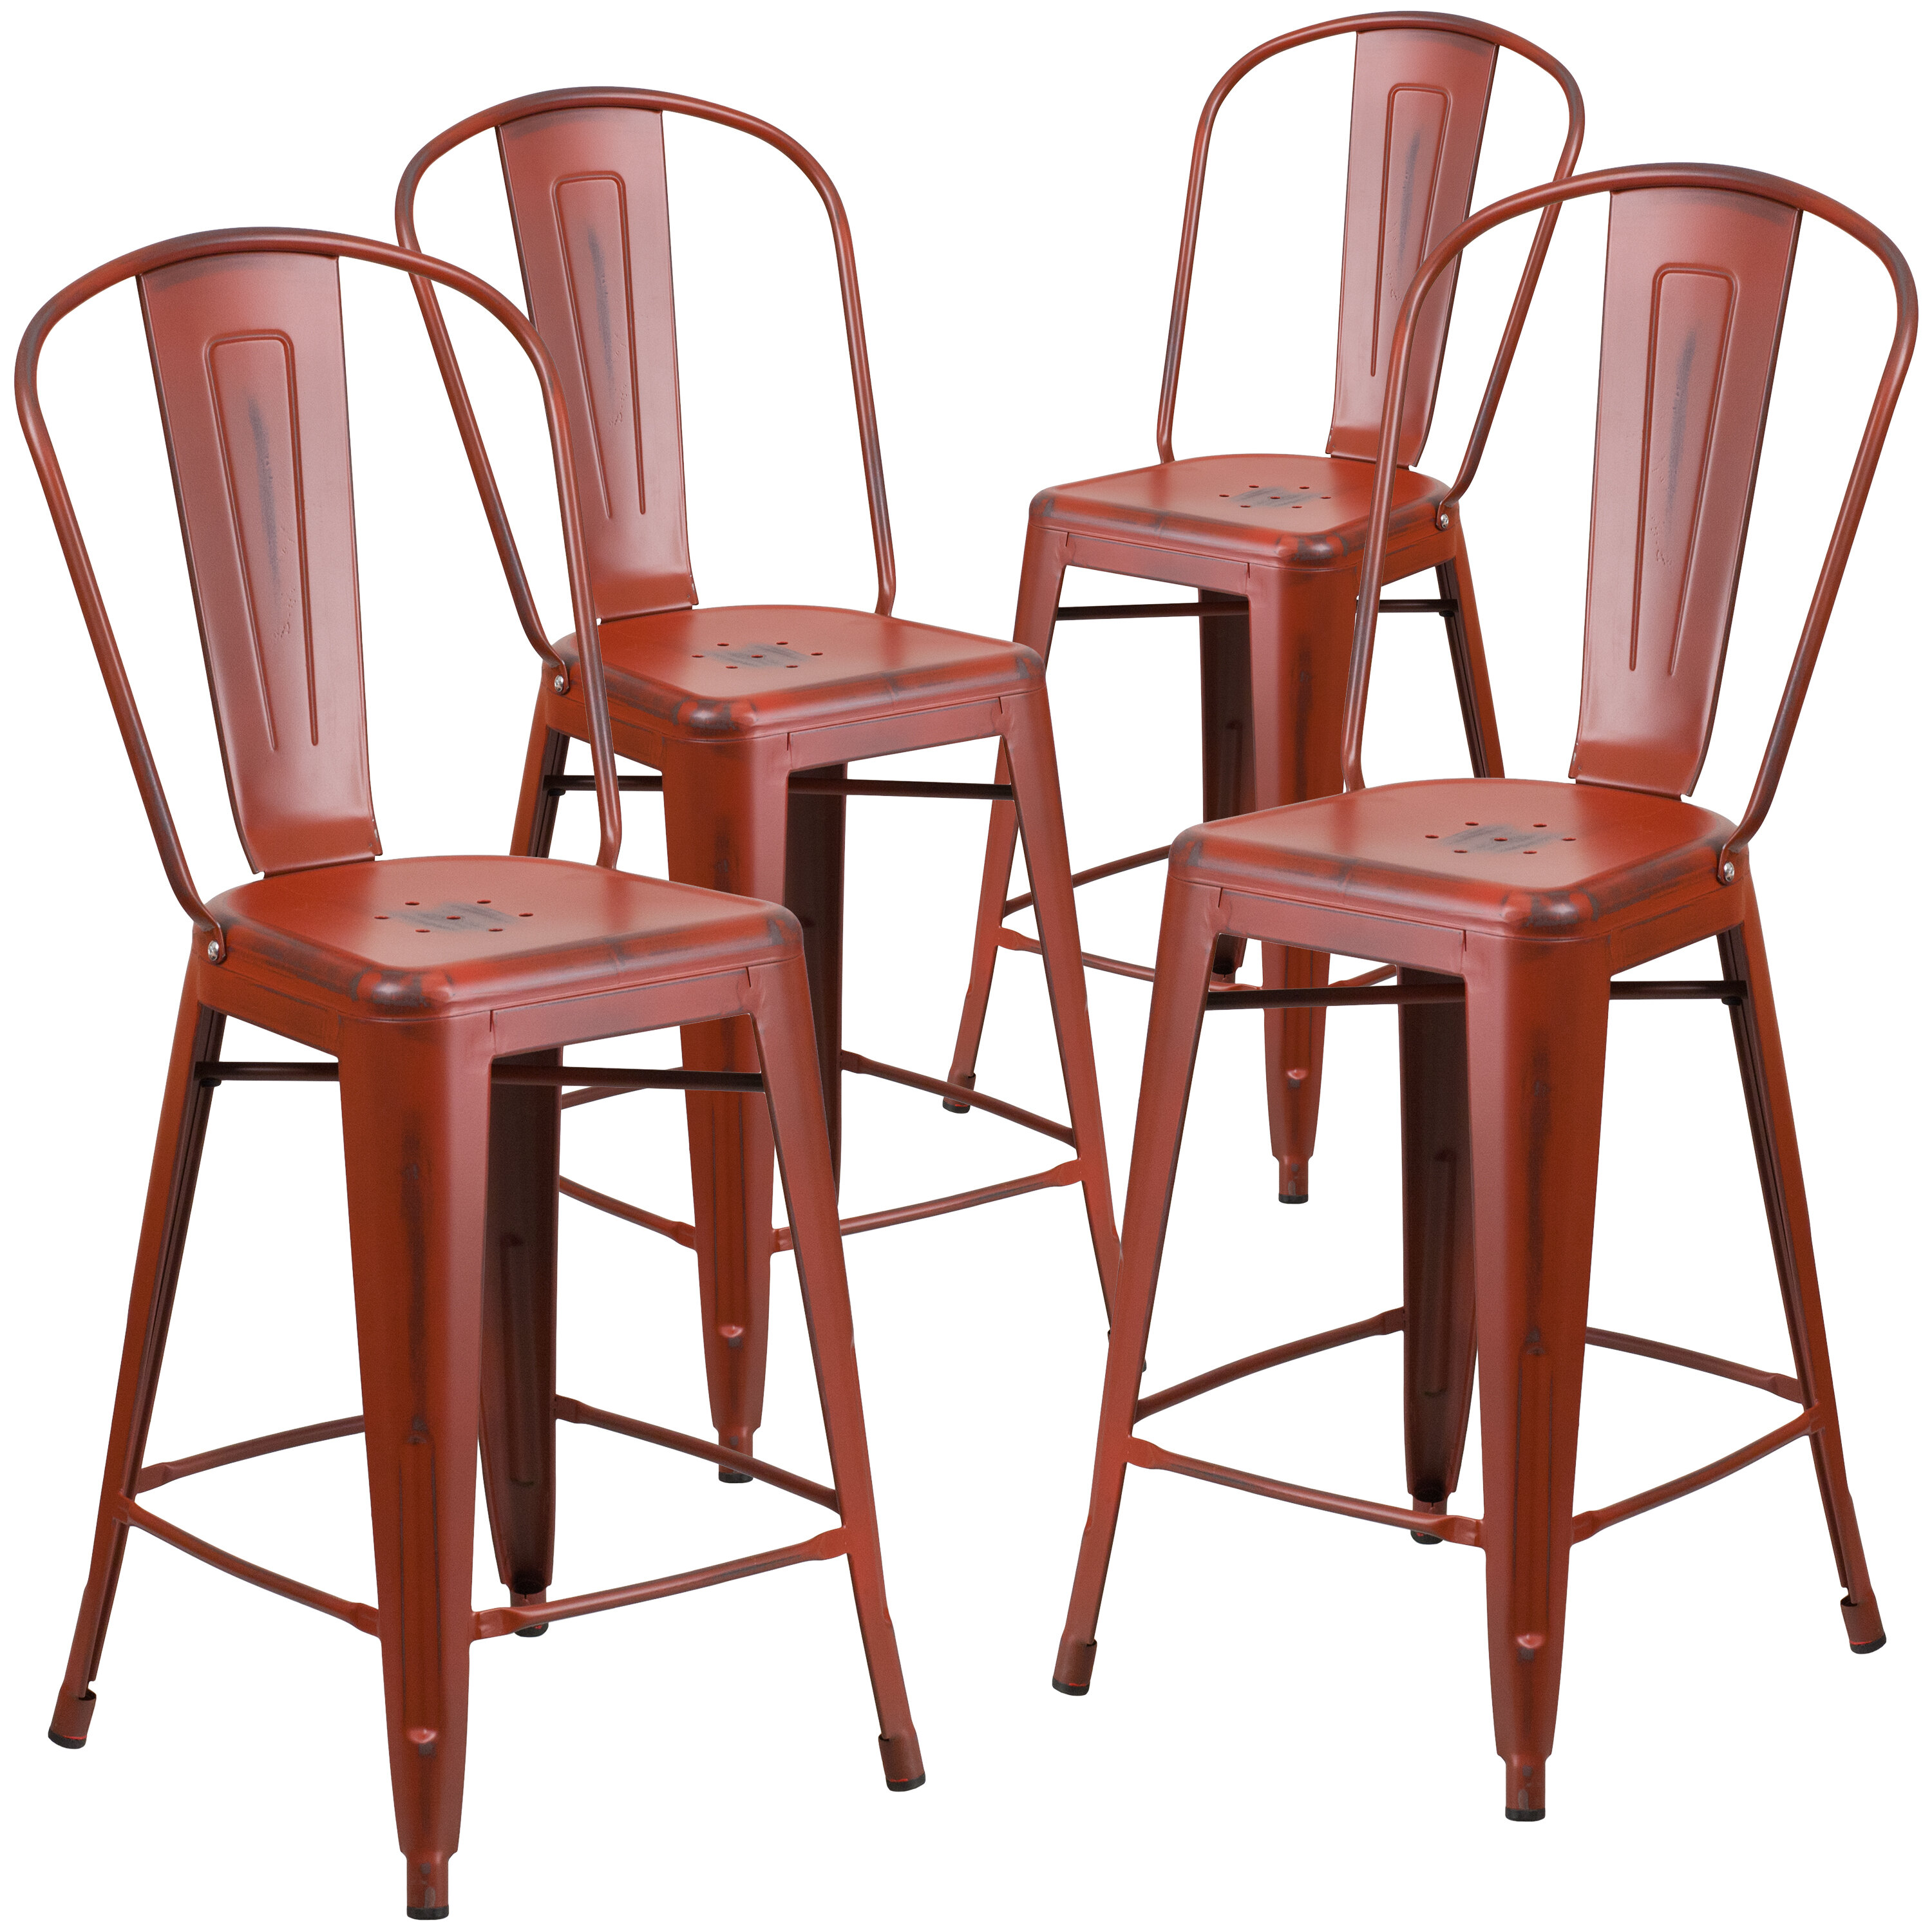 Featured image of post Red Bar Stools With Backs / Flash furniture store is the authorized dealer of flash furniture.